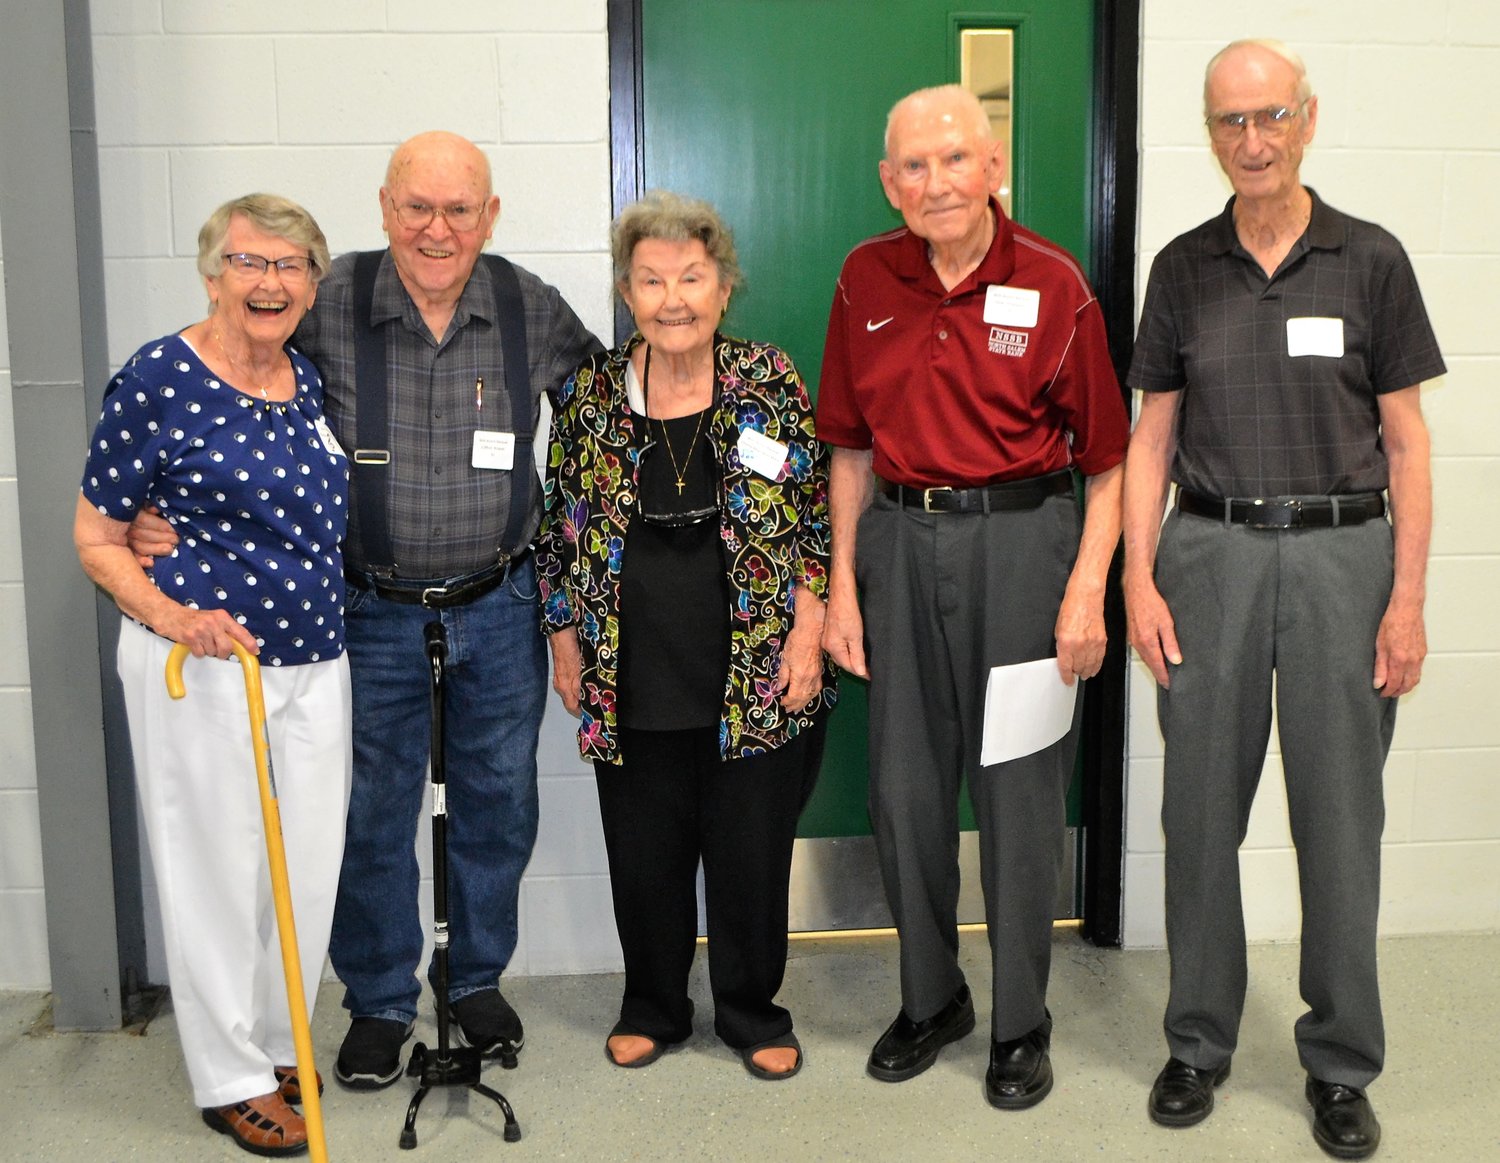 The class of 1952 was recognized for 70 years since graduation at the recent Bainbridge High School Alumni banquet. Representing the class, from left, are: Raquel Etcheson Hueber, Clifford Knauer, Donna Mae Blois Miles, Richard Thompson and Doyne Priest. Attending, but not available for the photo was Marcia Malayer Cloncs.